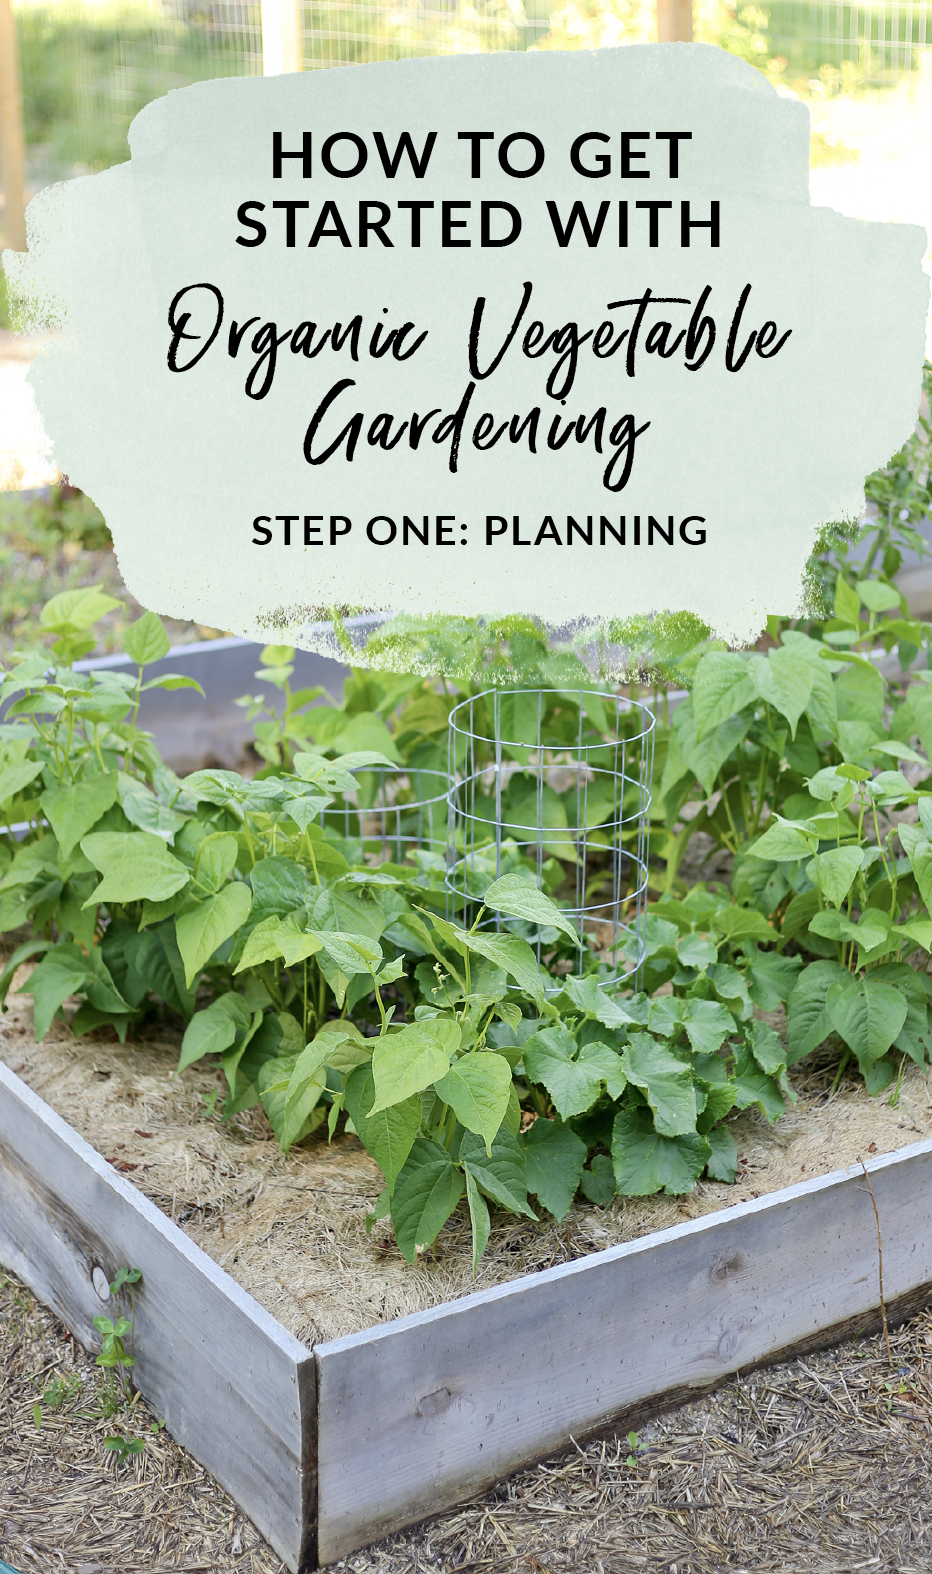 How to get started with organic vegetable gardening with proper planning and knowing your growing zone